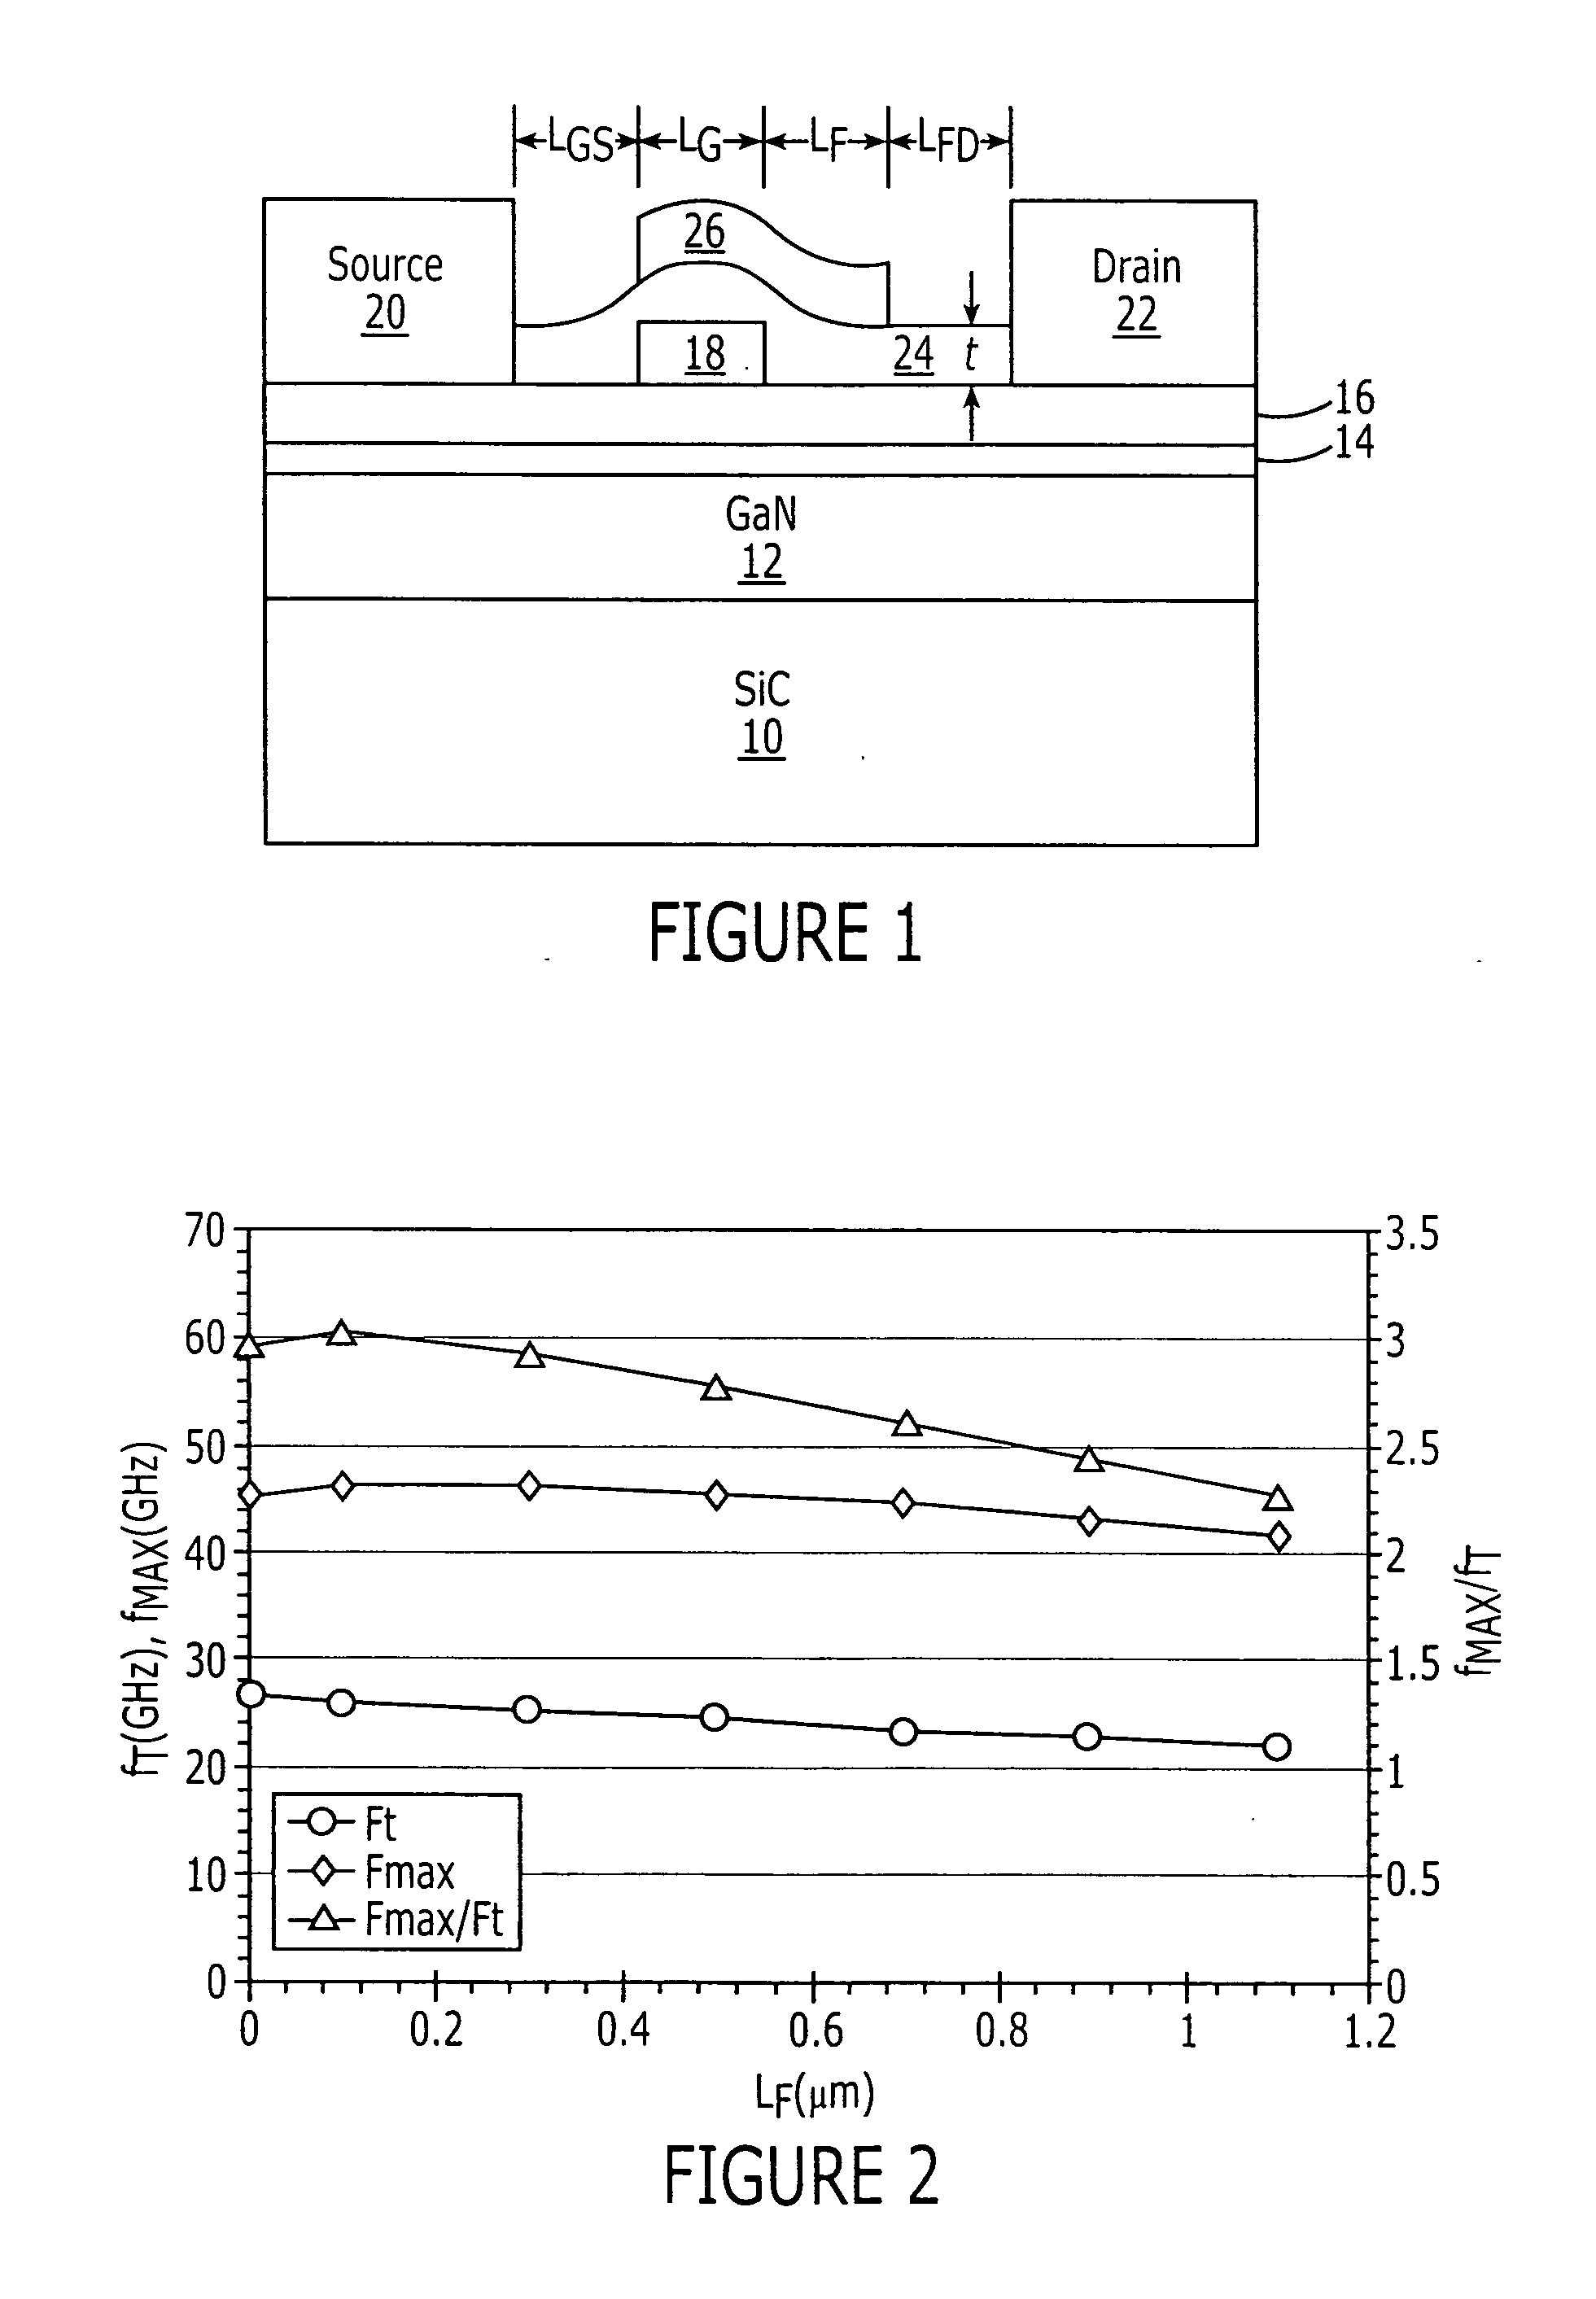 High power density and/or linearity transistors